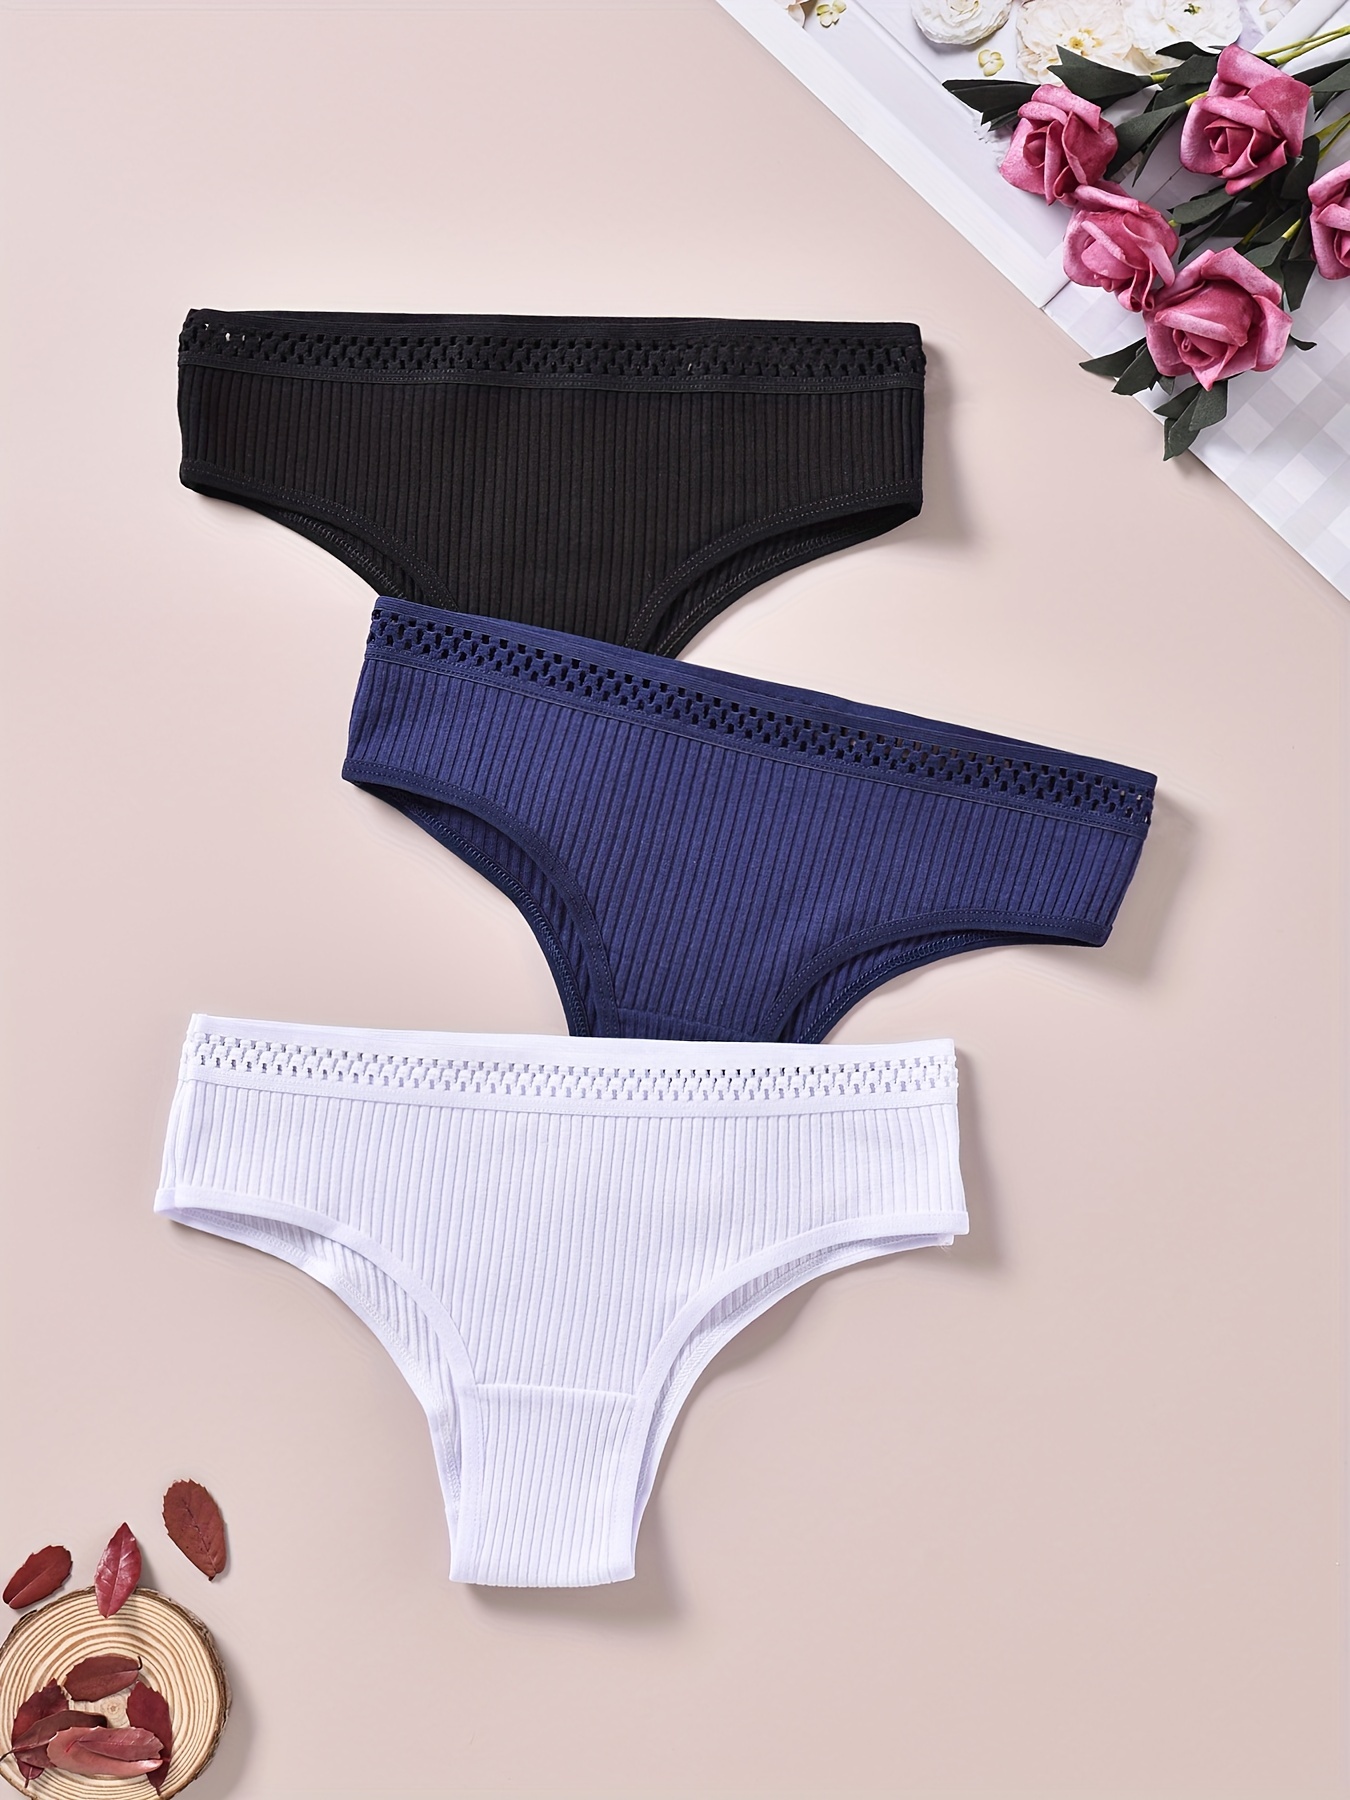 4pcs Solid Ribbed Briefs, Comfy & Breathable Stretchy Intimates Panties,  Women's Lingerie & Underwear